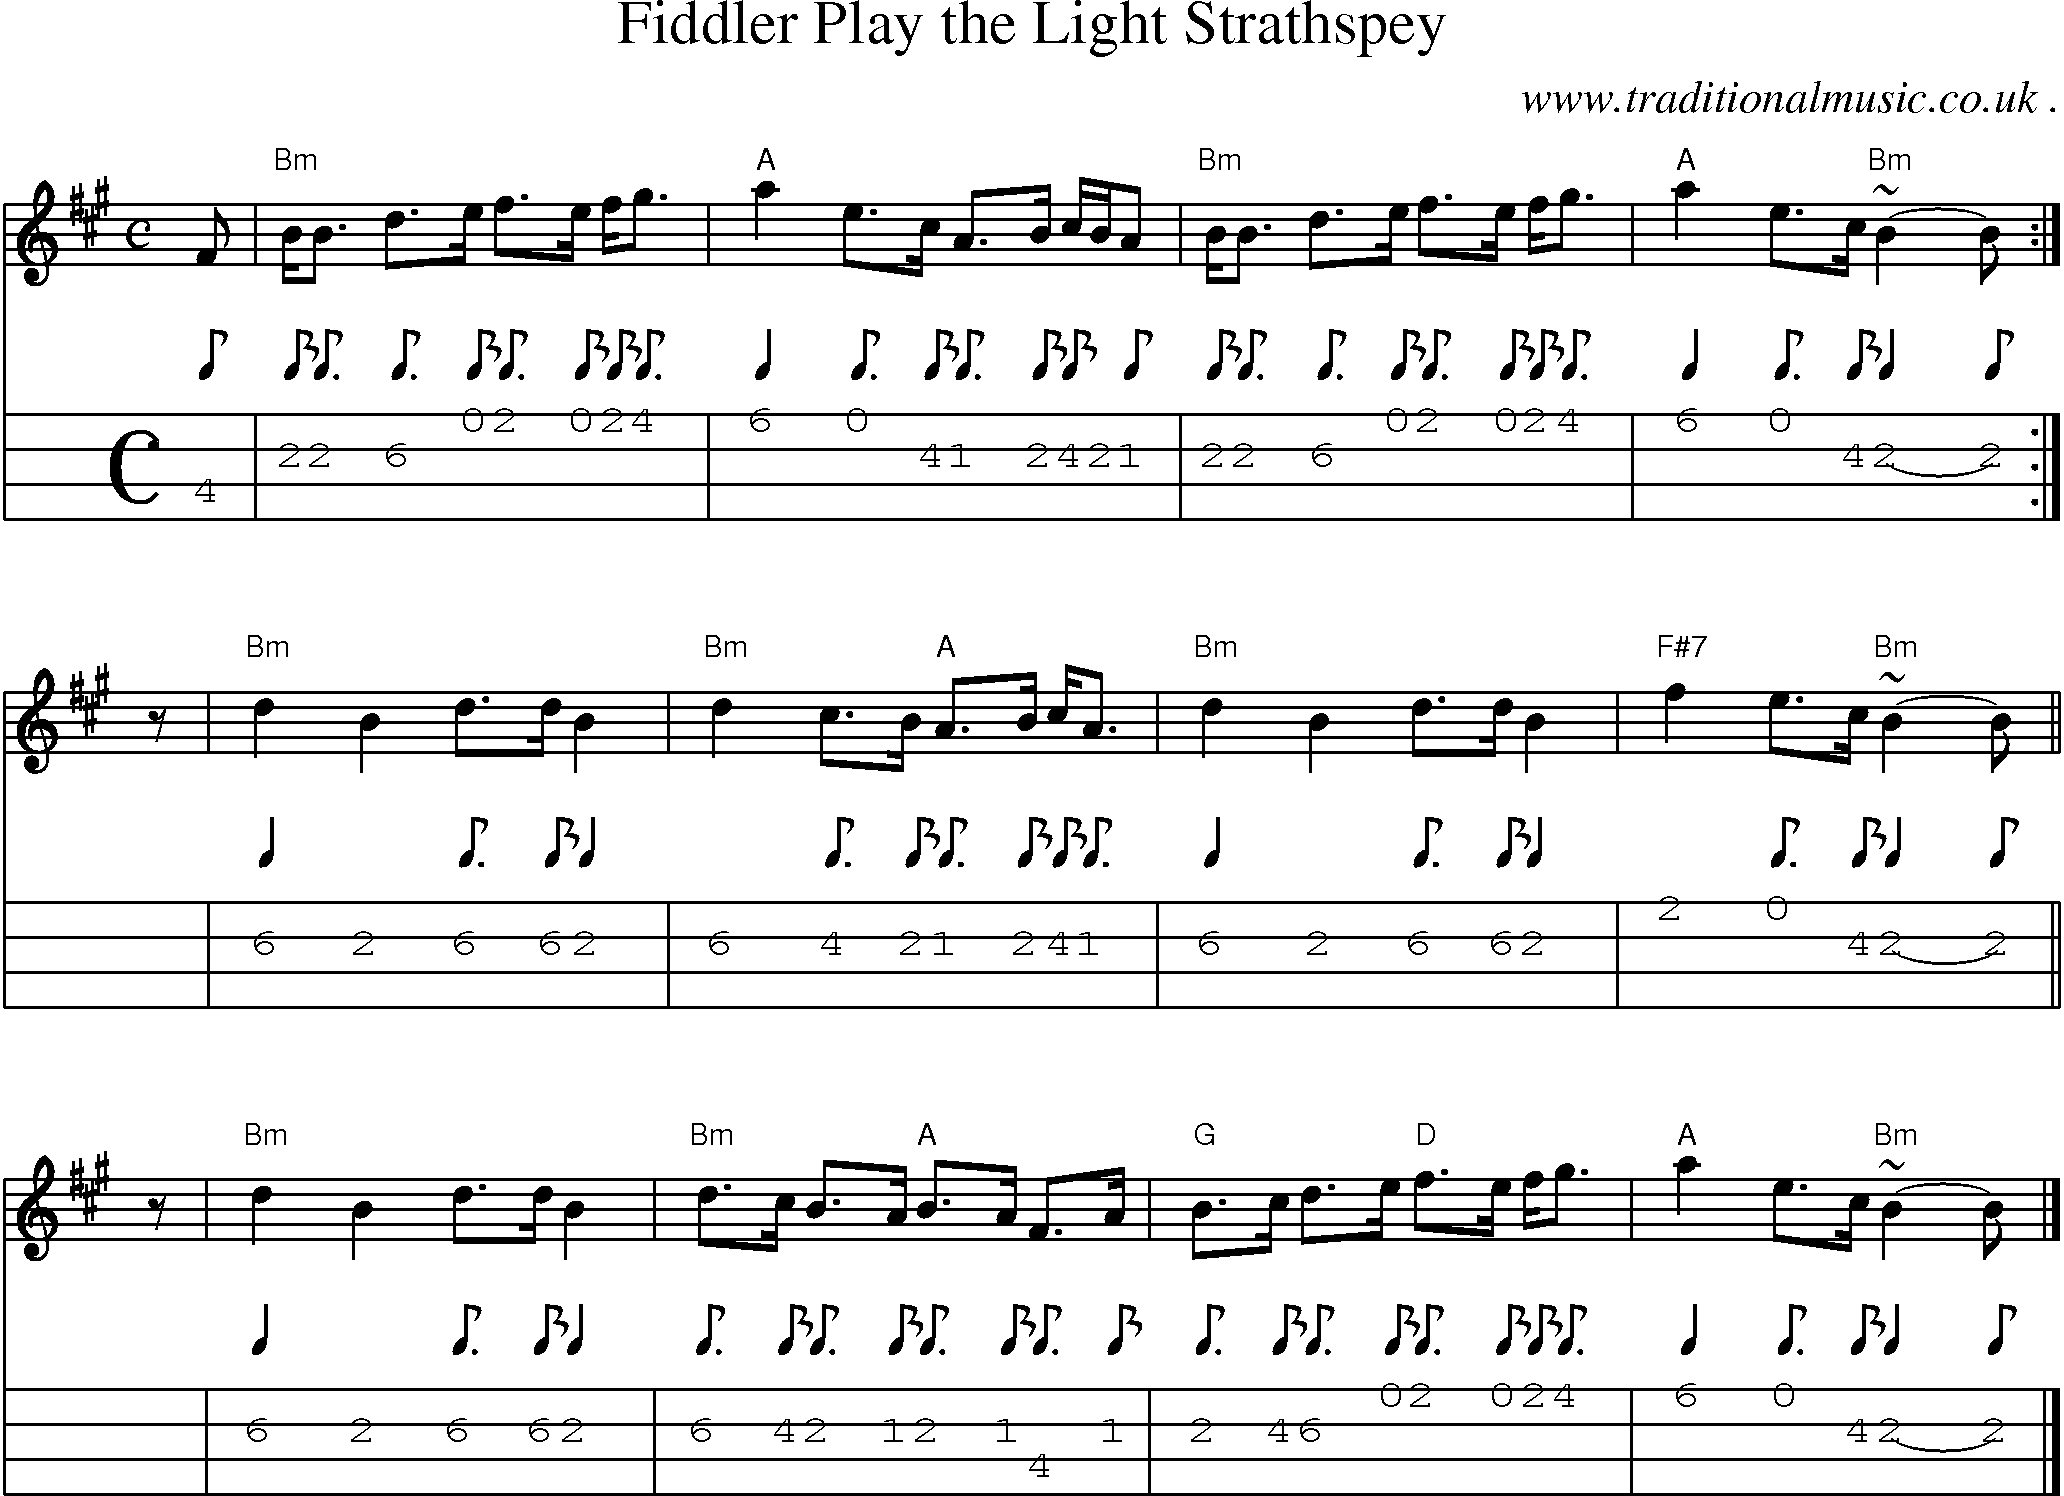 Sheet-music  score, Chords and Mandolin Tabs for Fiddler Play The Light Strathspey